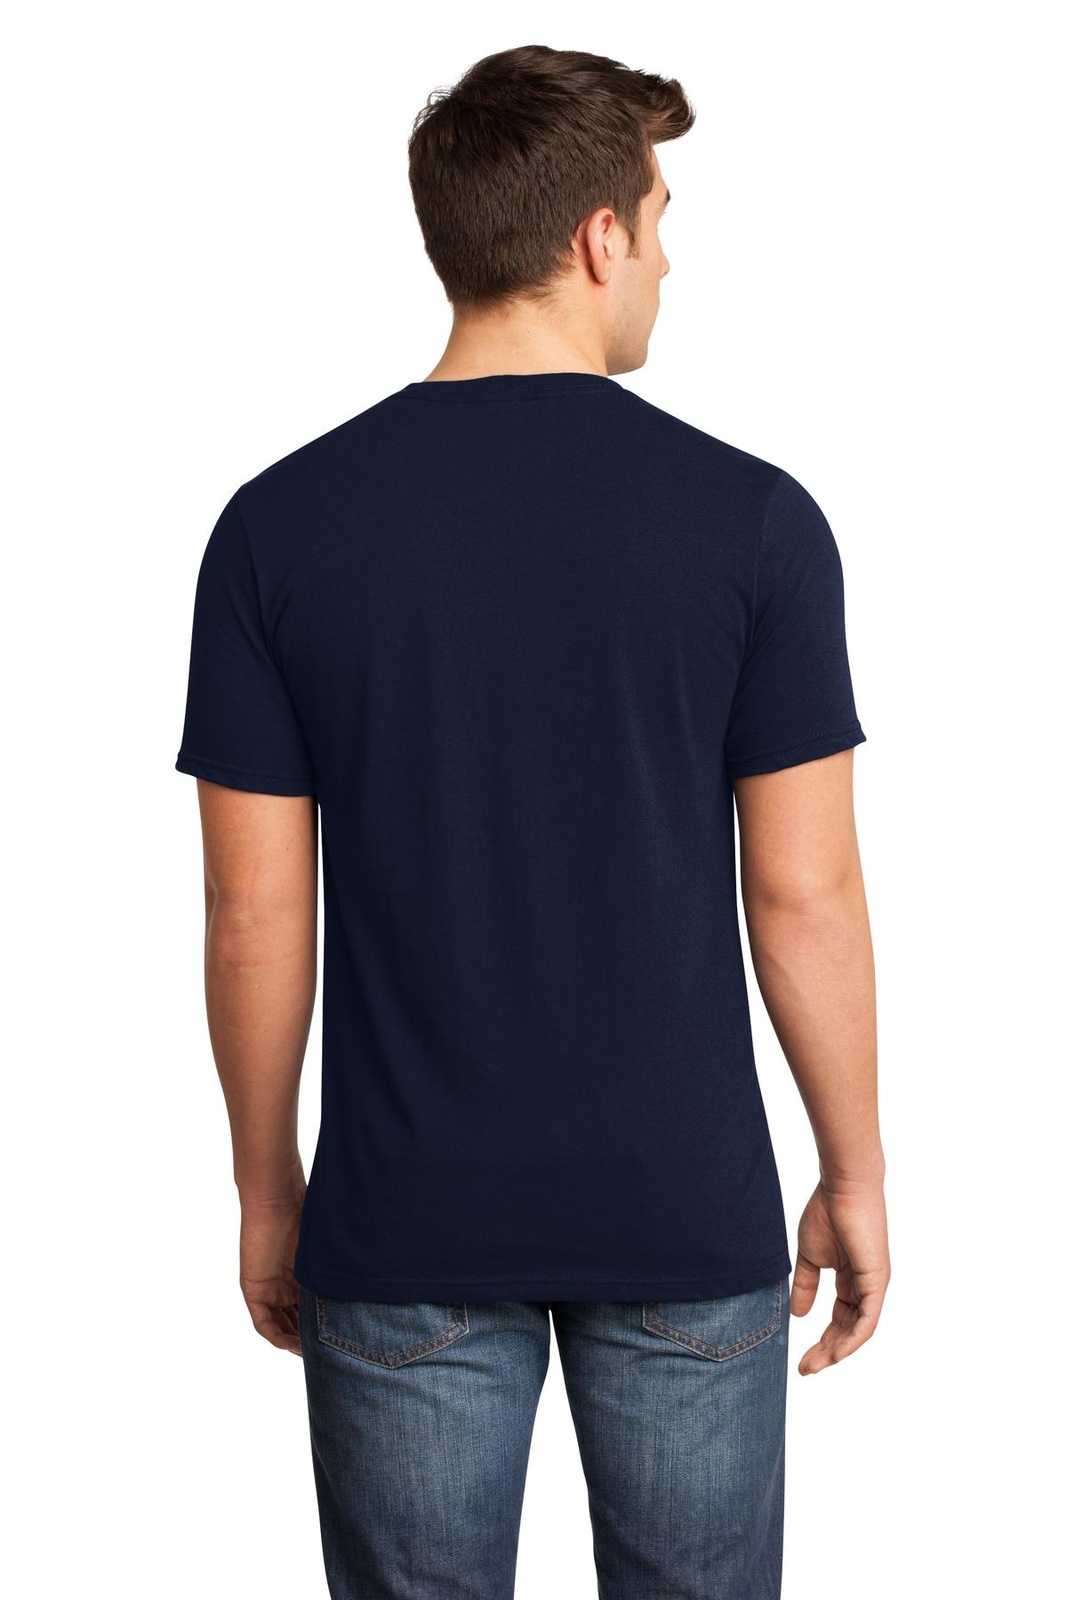 District DT6500 Very Important Tee V-Neck - New Navy - HIT a Double - 1